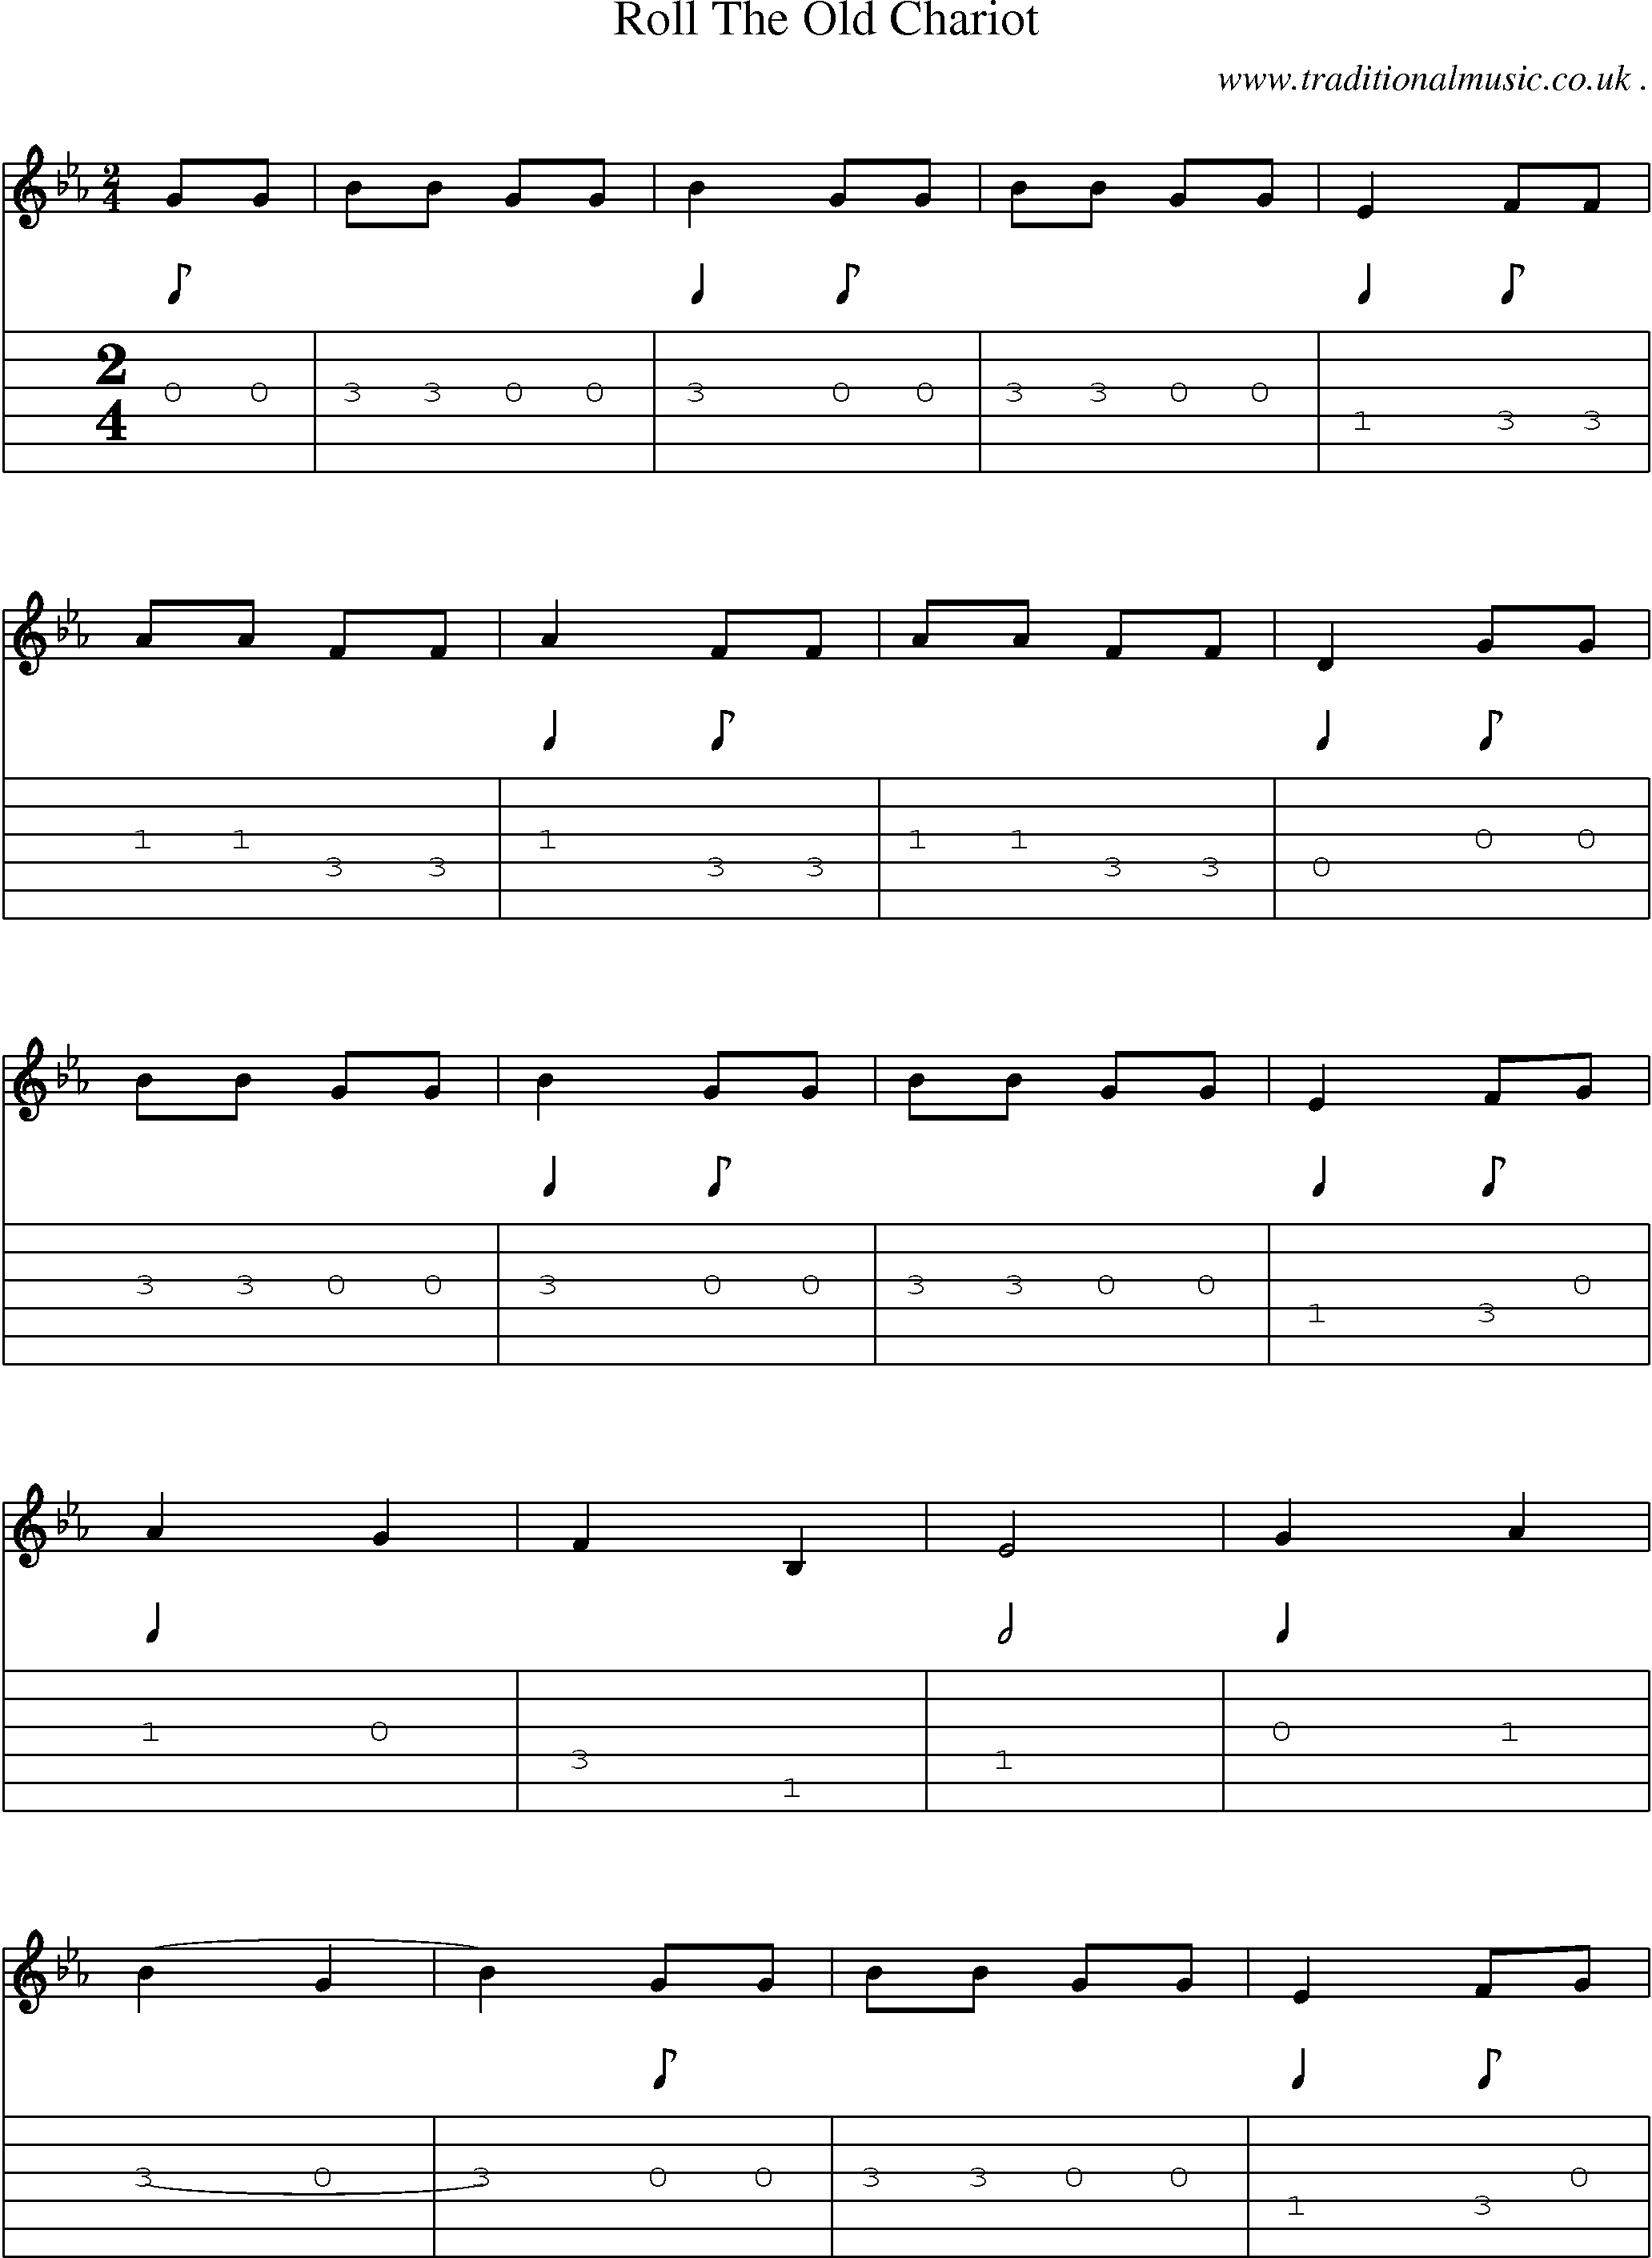 Sheet-Music and Guitar Tabs for Roll The Old Chariot